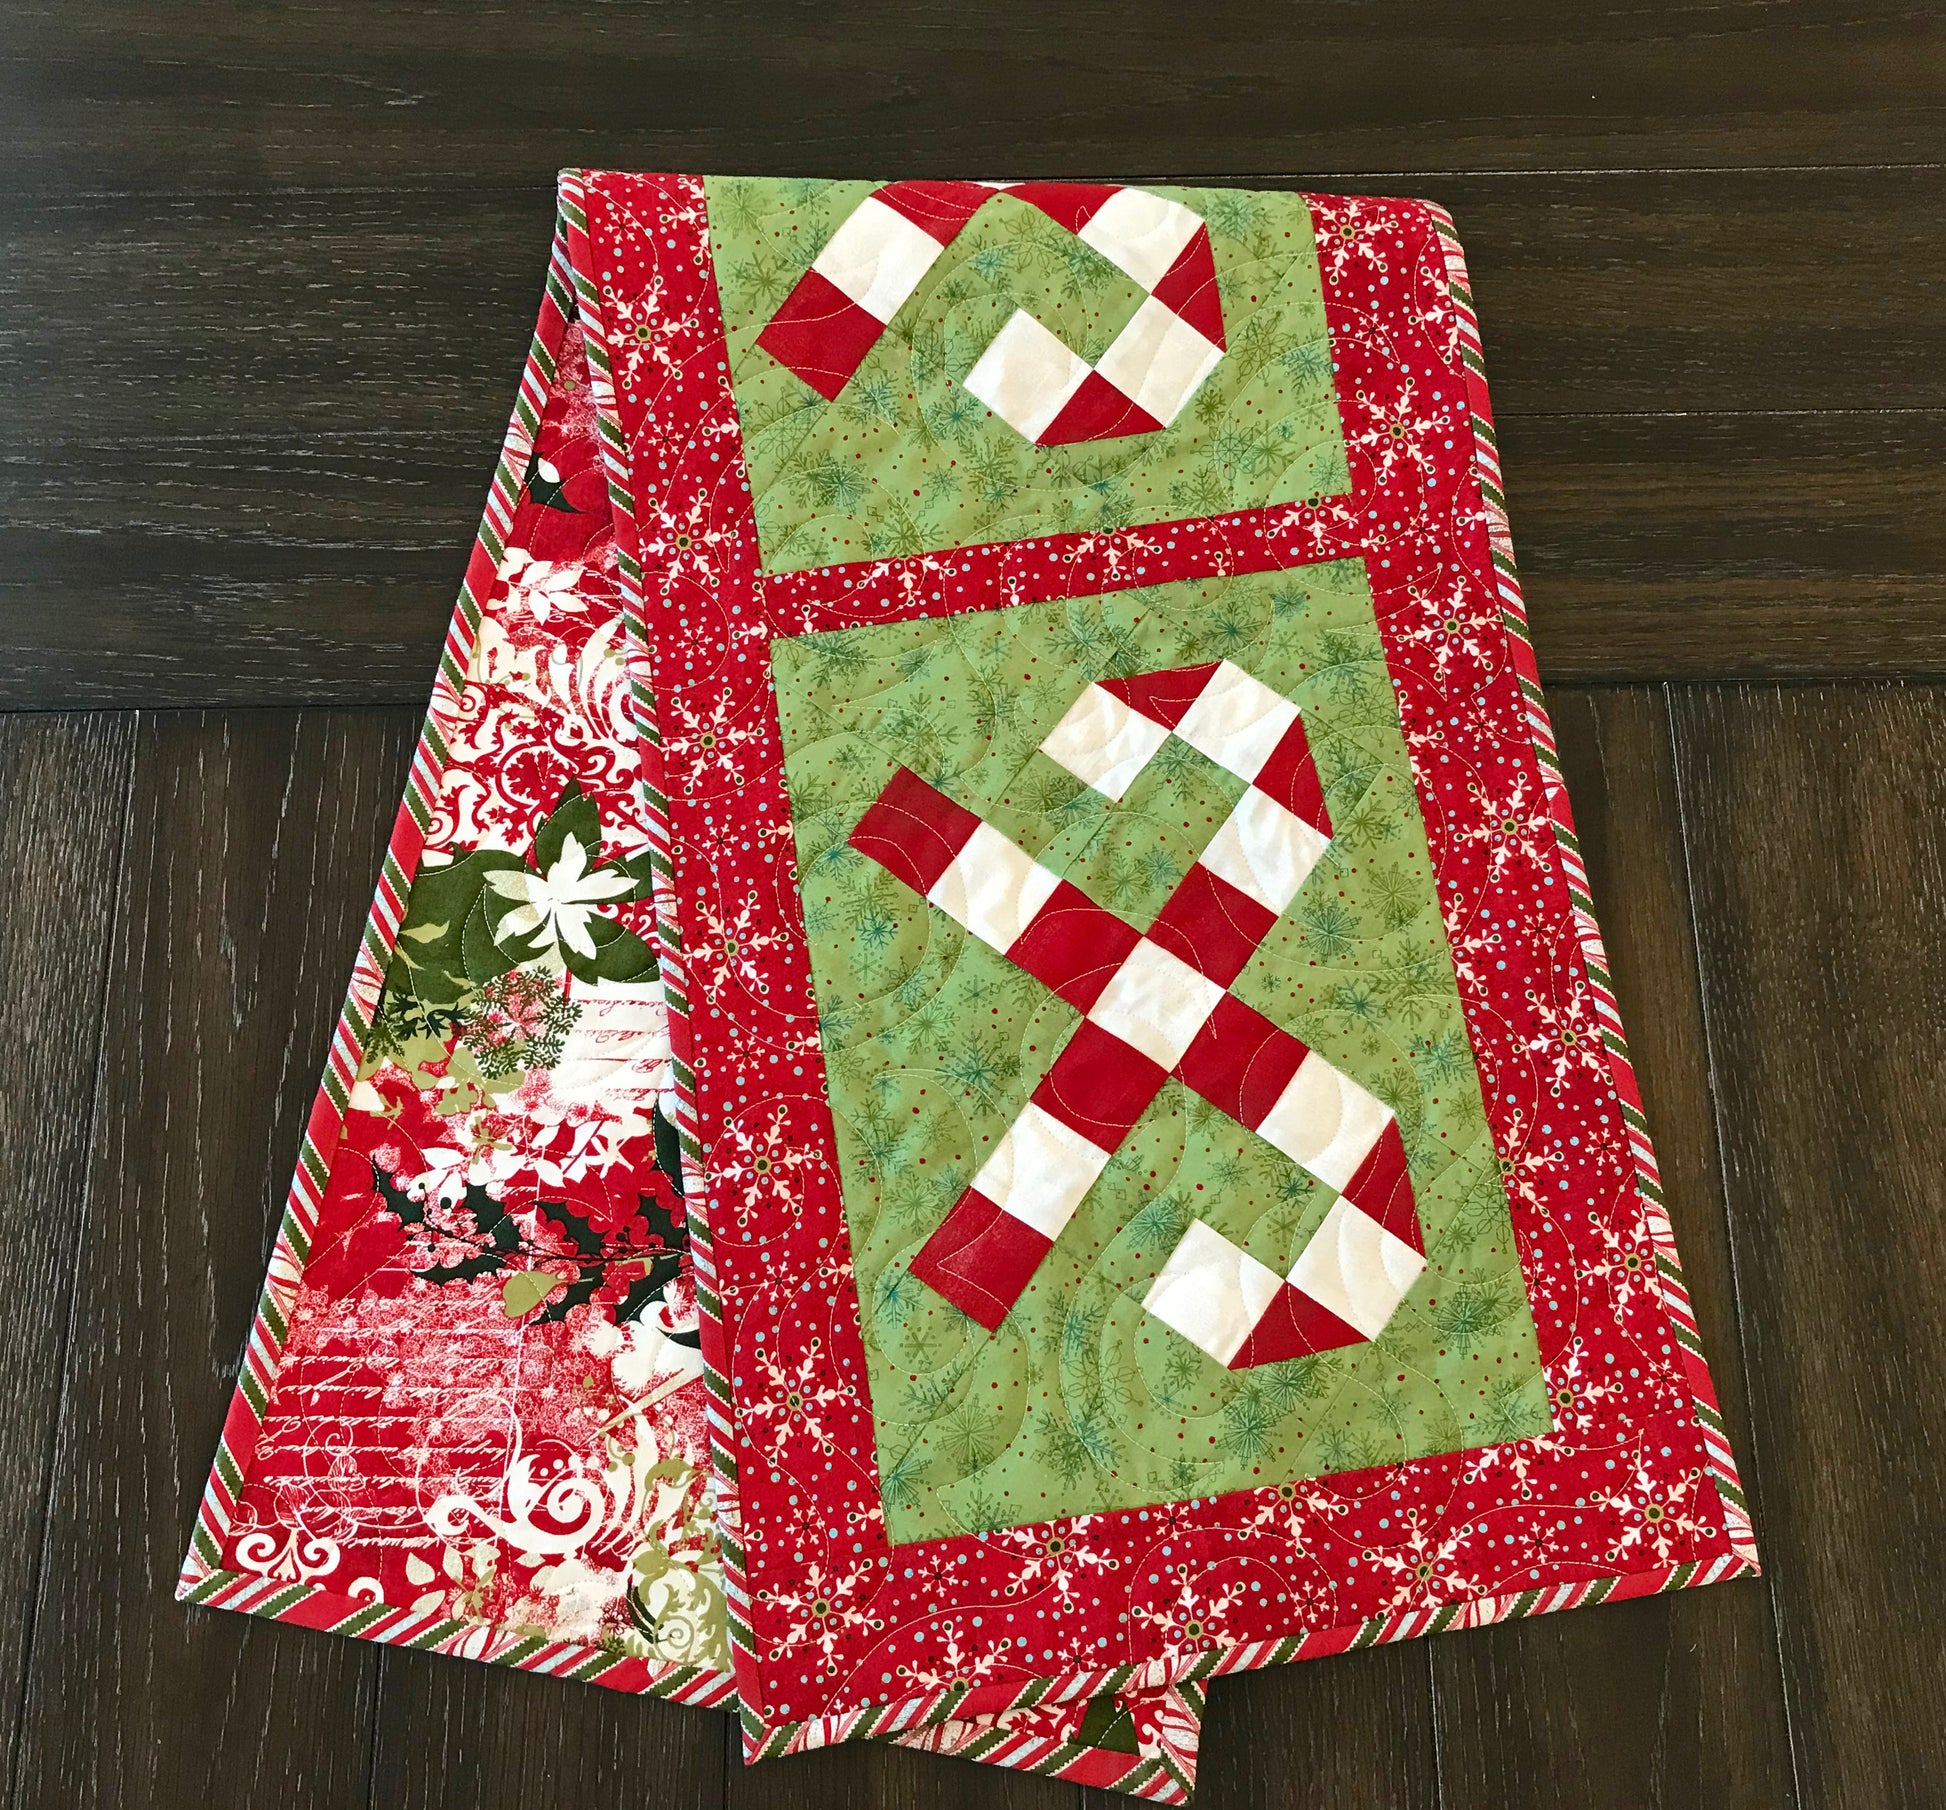 Candy Cane Lane Table Runner Pattern - Digital Pattern - Handmade Quilts, Digital Patterns, and Home Décor items online - Cuddle Cat Quiltworks